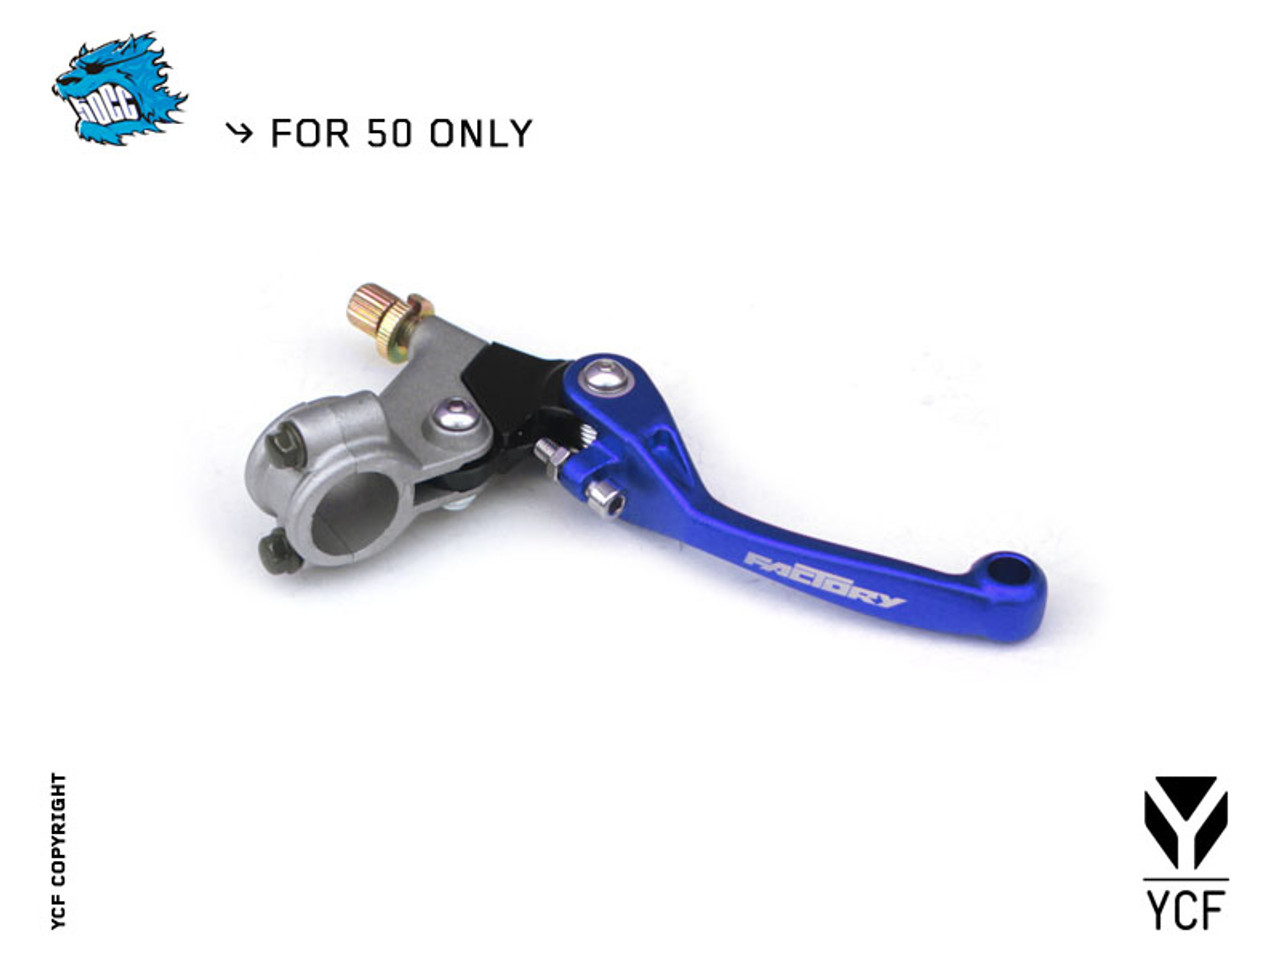 YCF50 FRONT BRAKE LEVER - BLUE